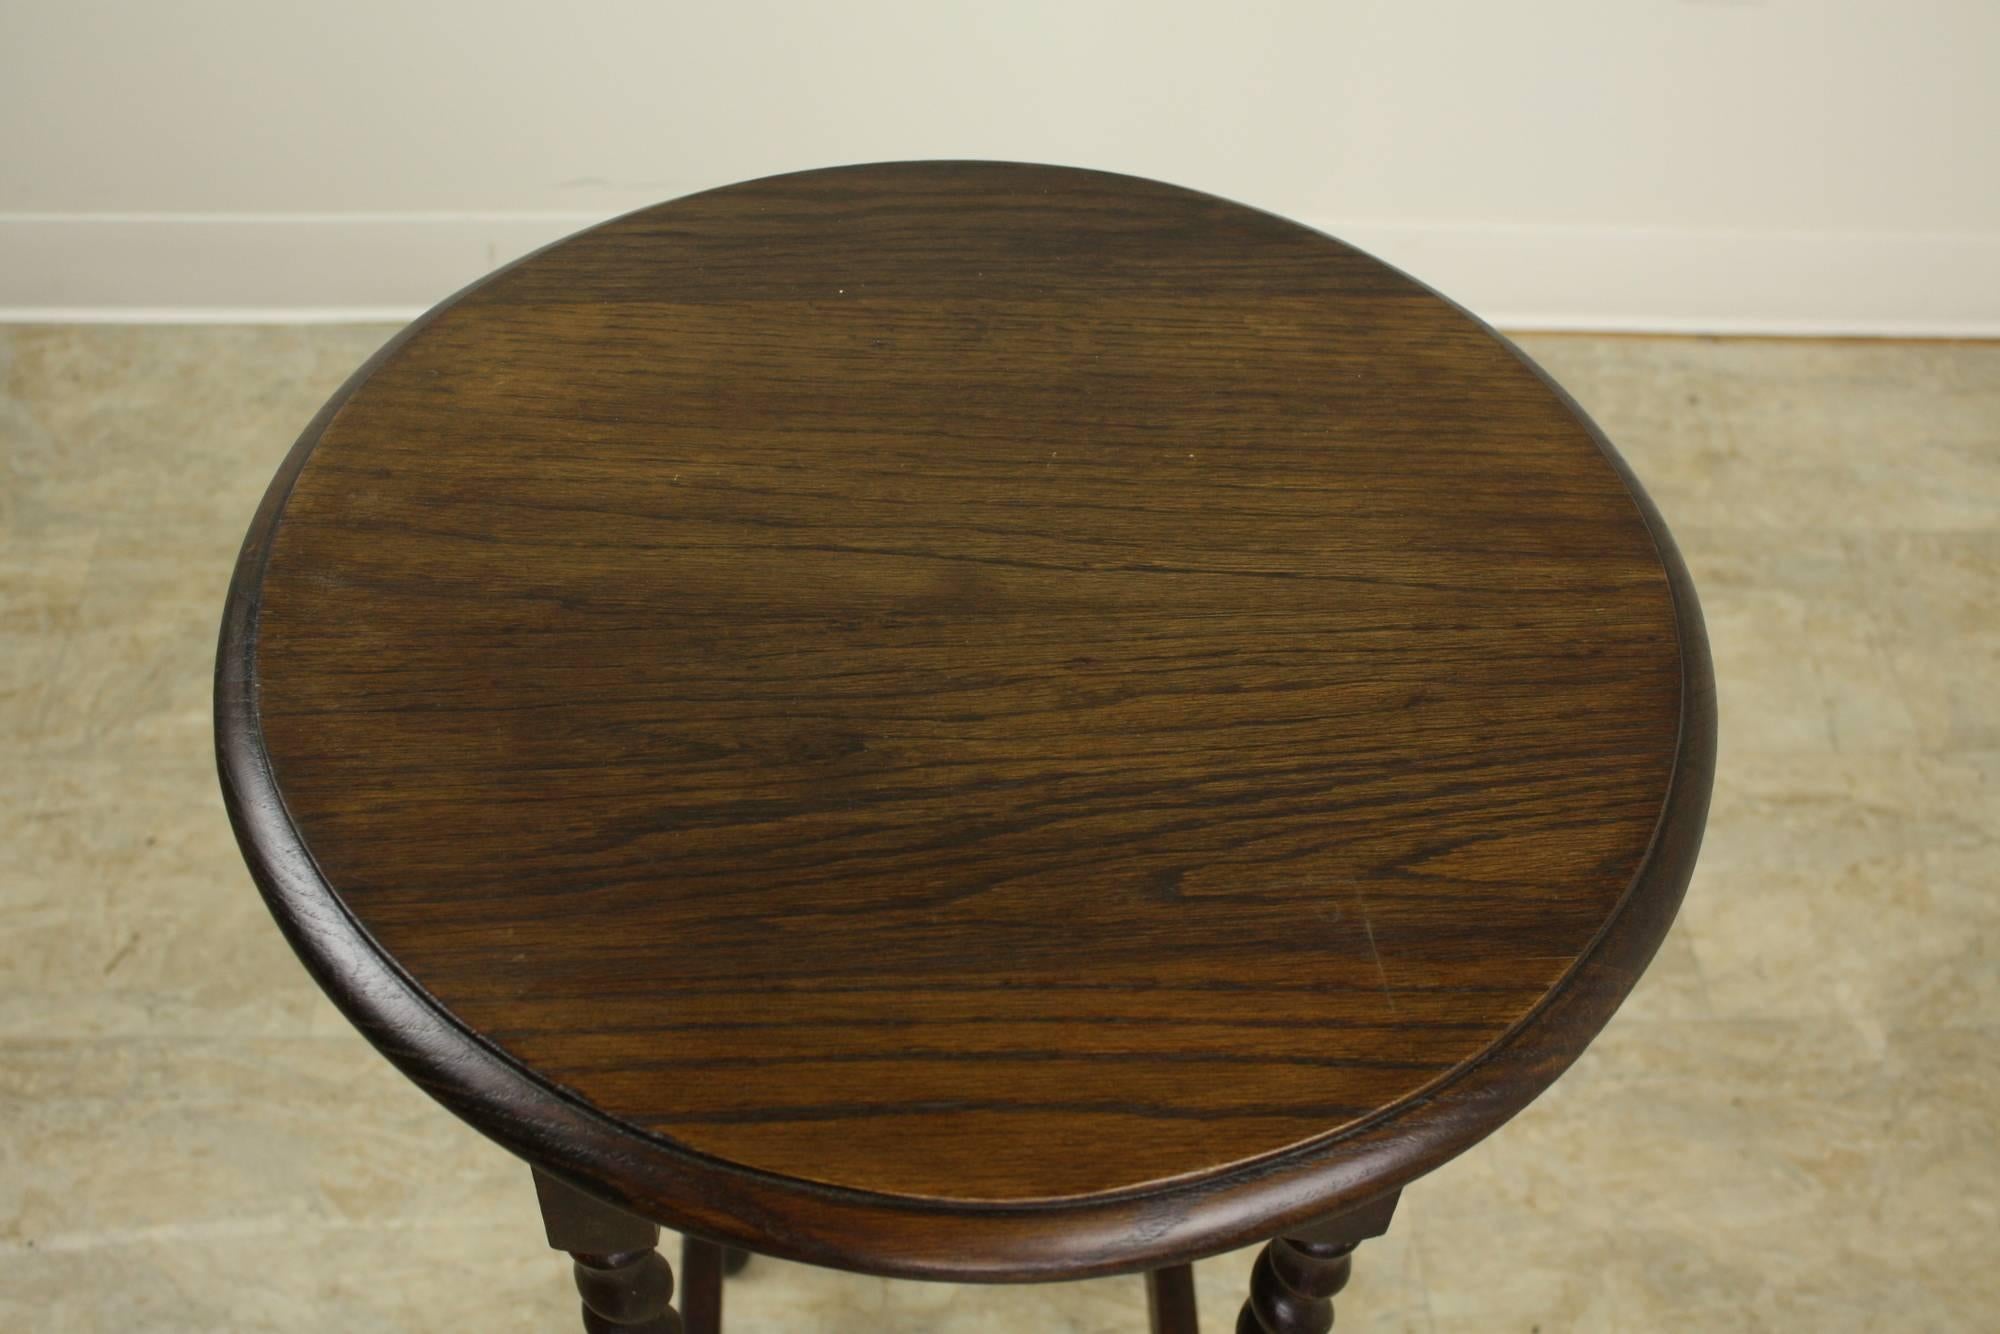 A charming simple occasional table in dark oak, with eye catching barley twist detail. Would make a nice lamp table and would pair nicely on either side of a sofa or guest bed with one of our other barley twist side tables.